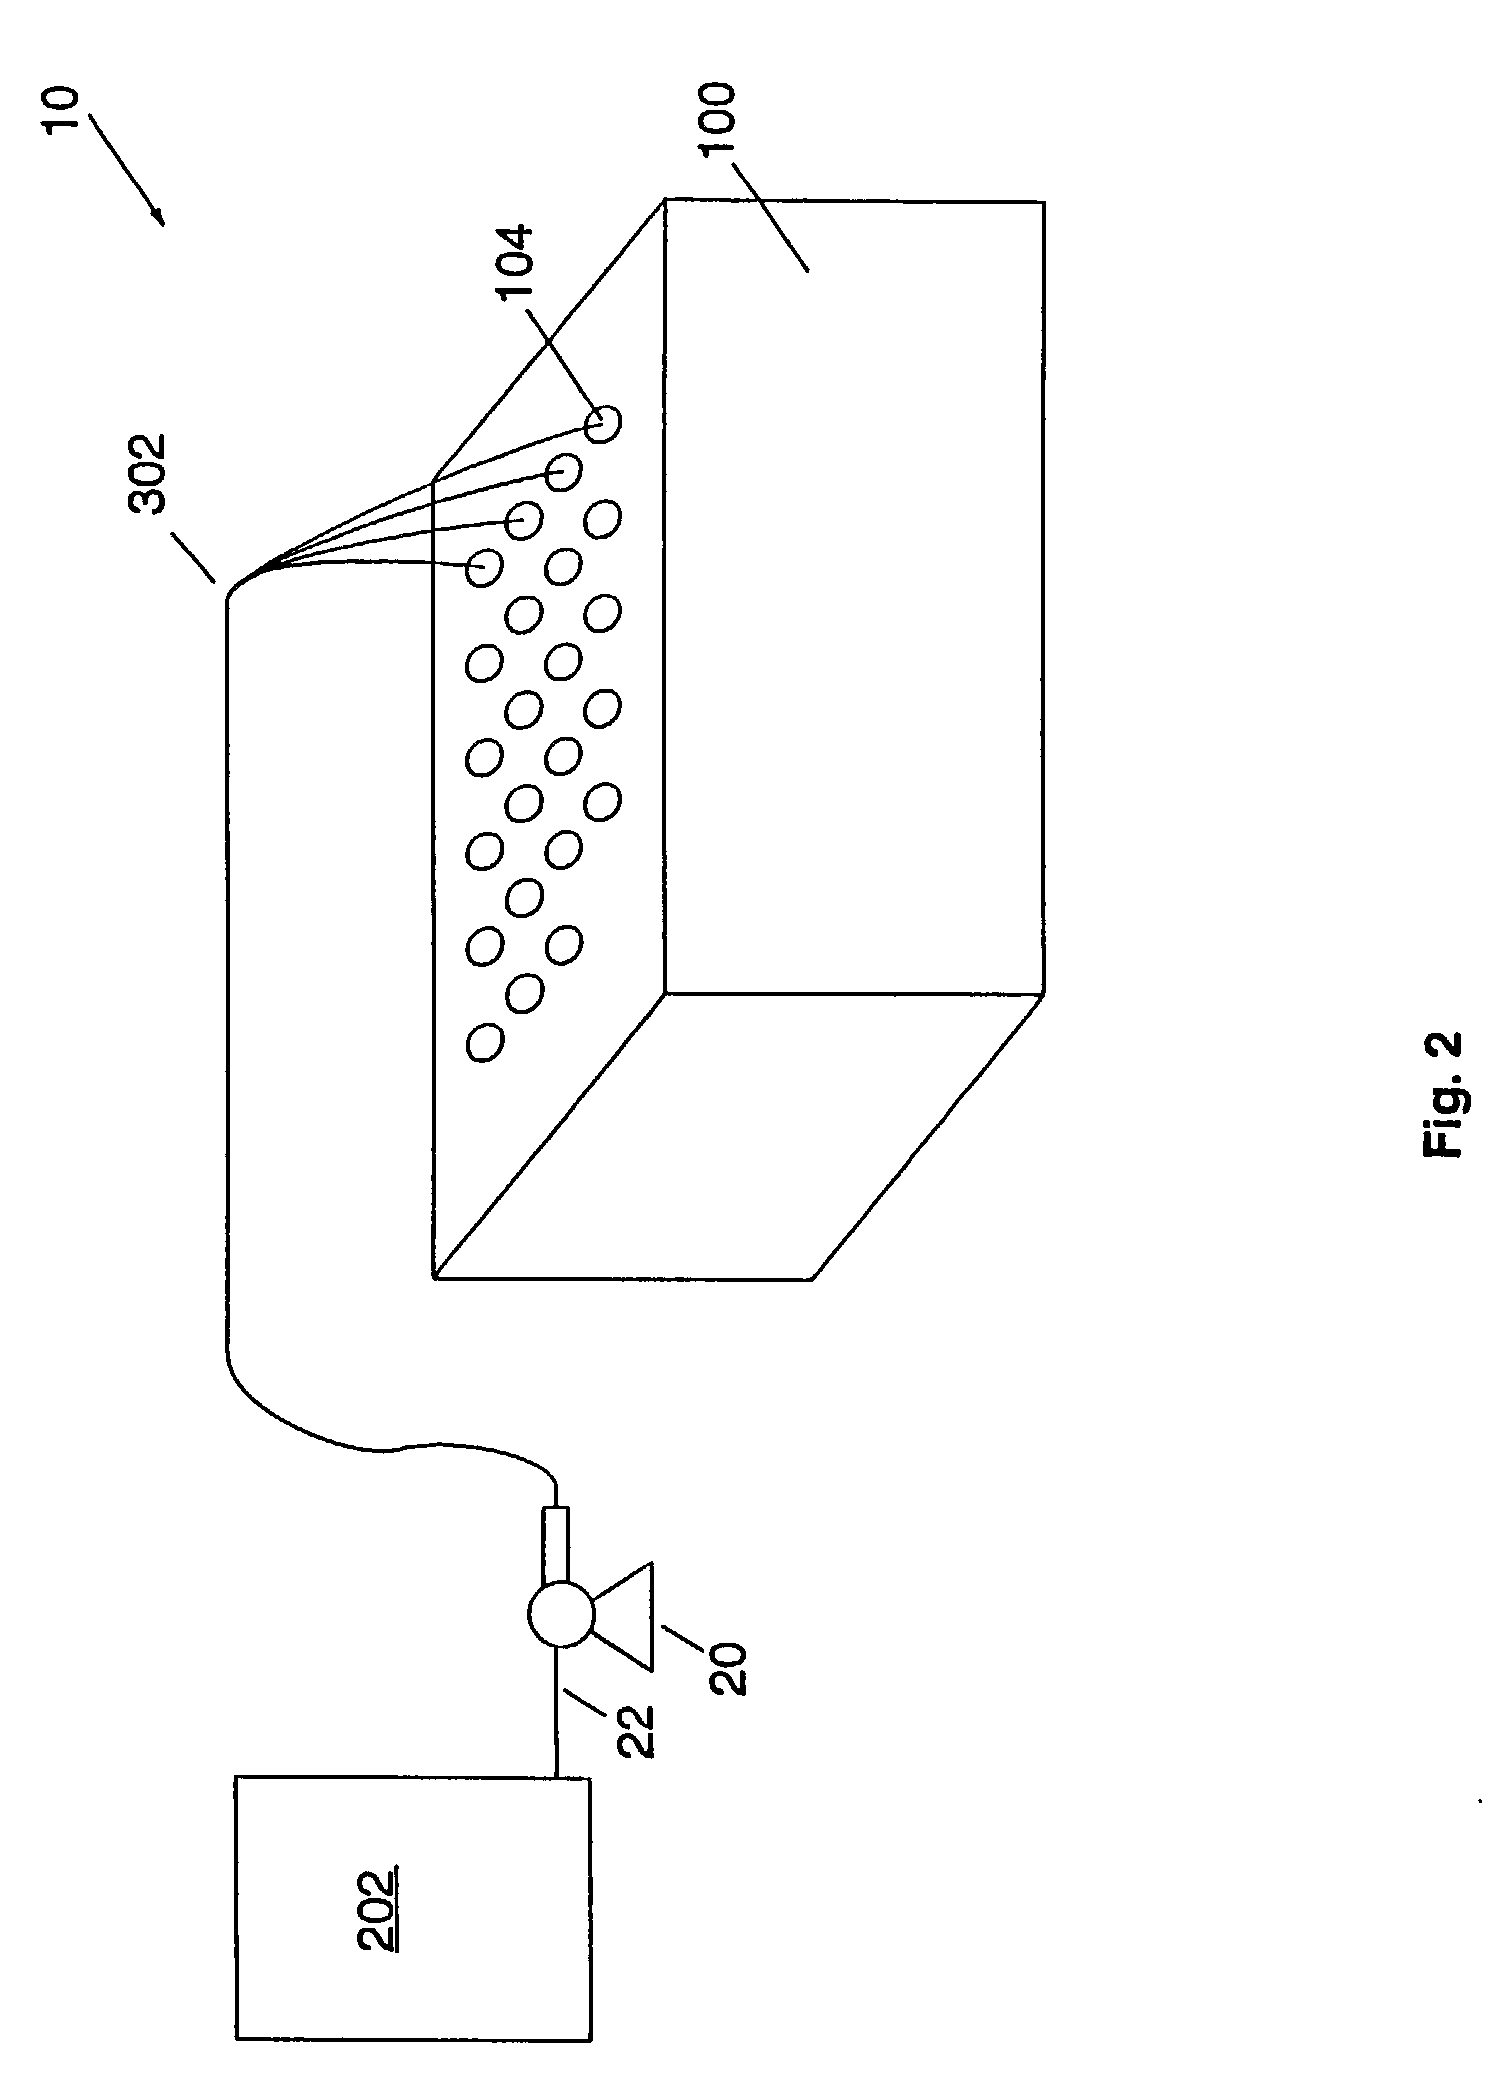 Parallel semi-continuous or continuous reactor system